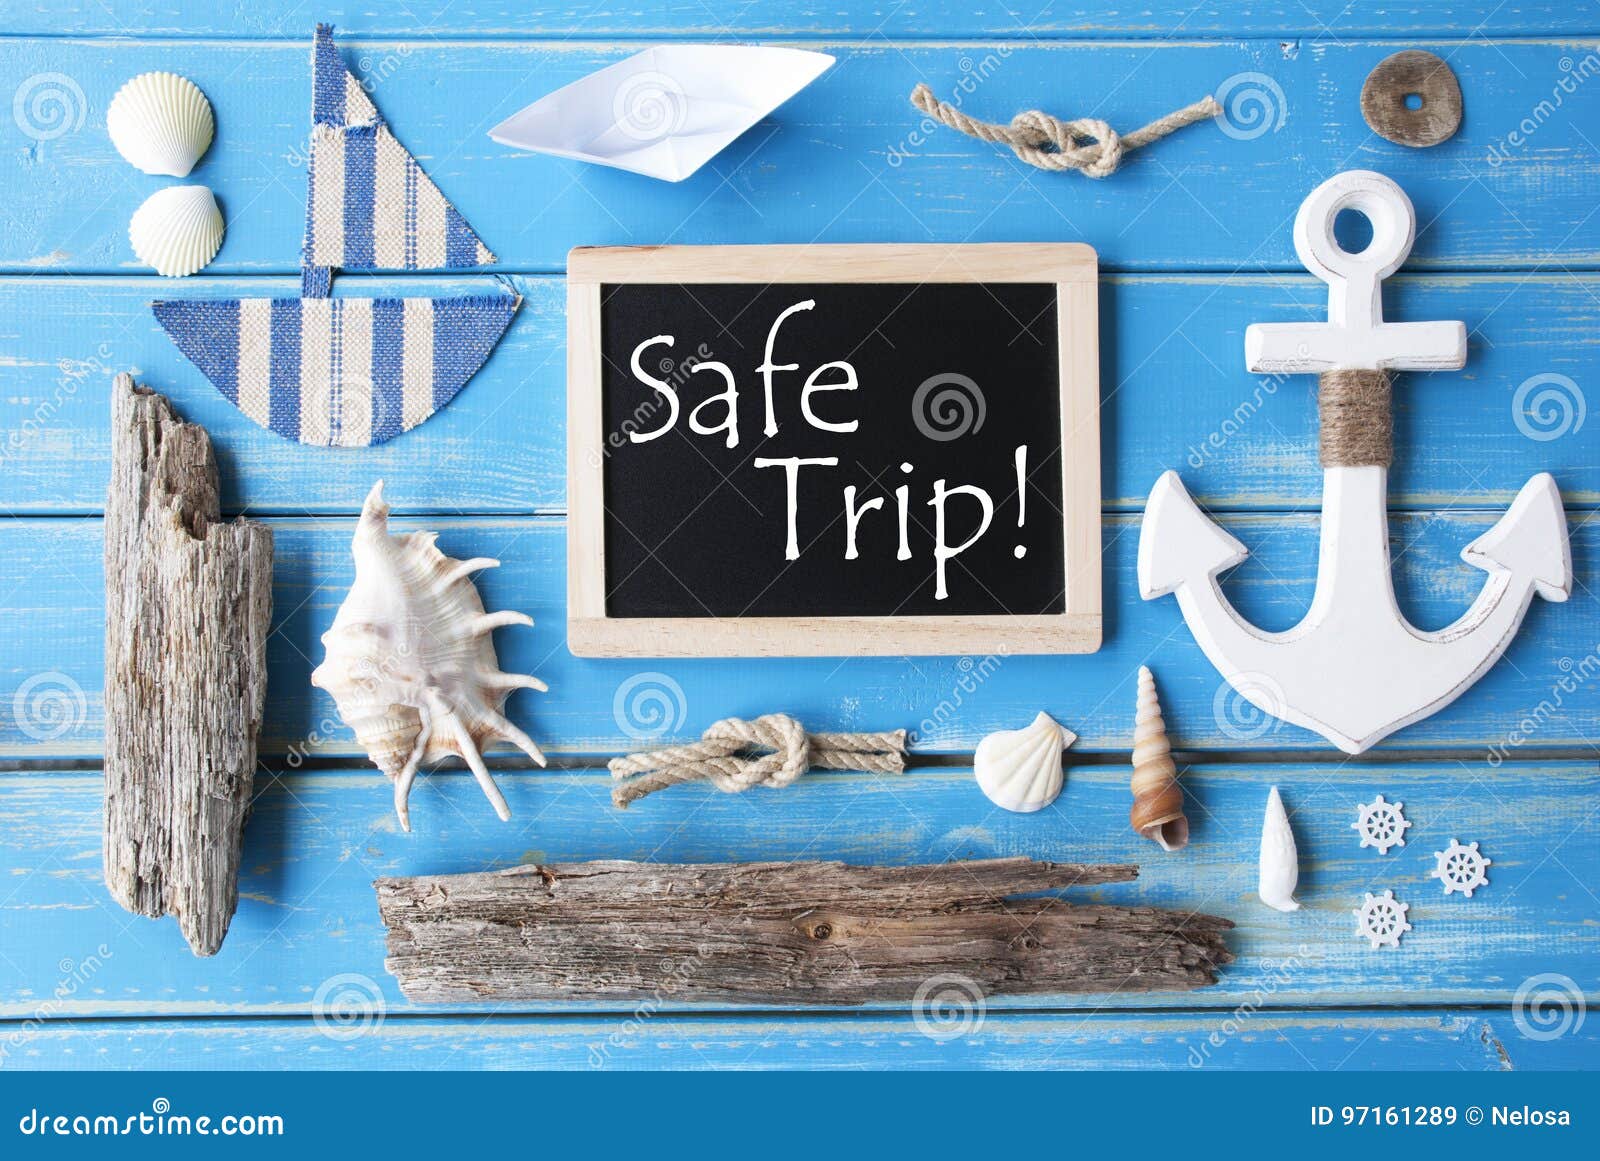 nautic chalkboard and text safe trip